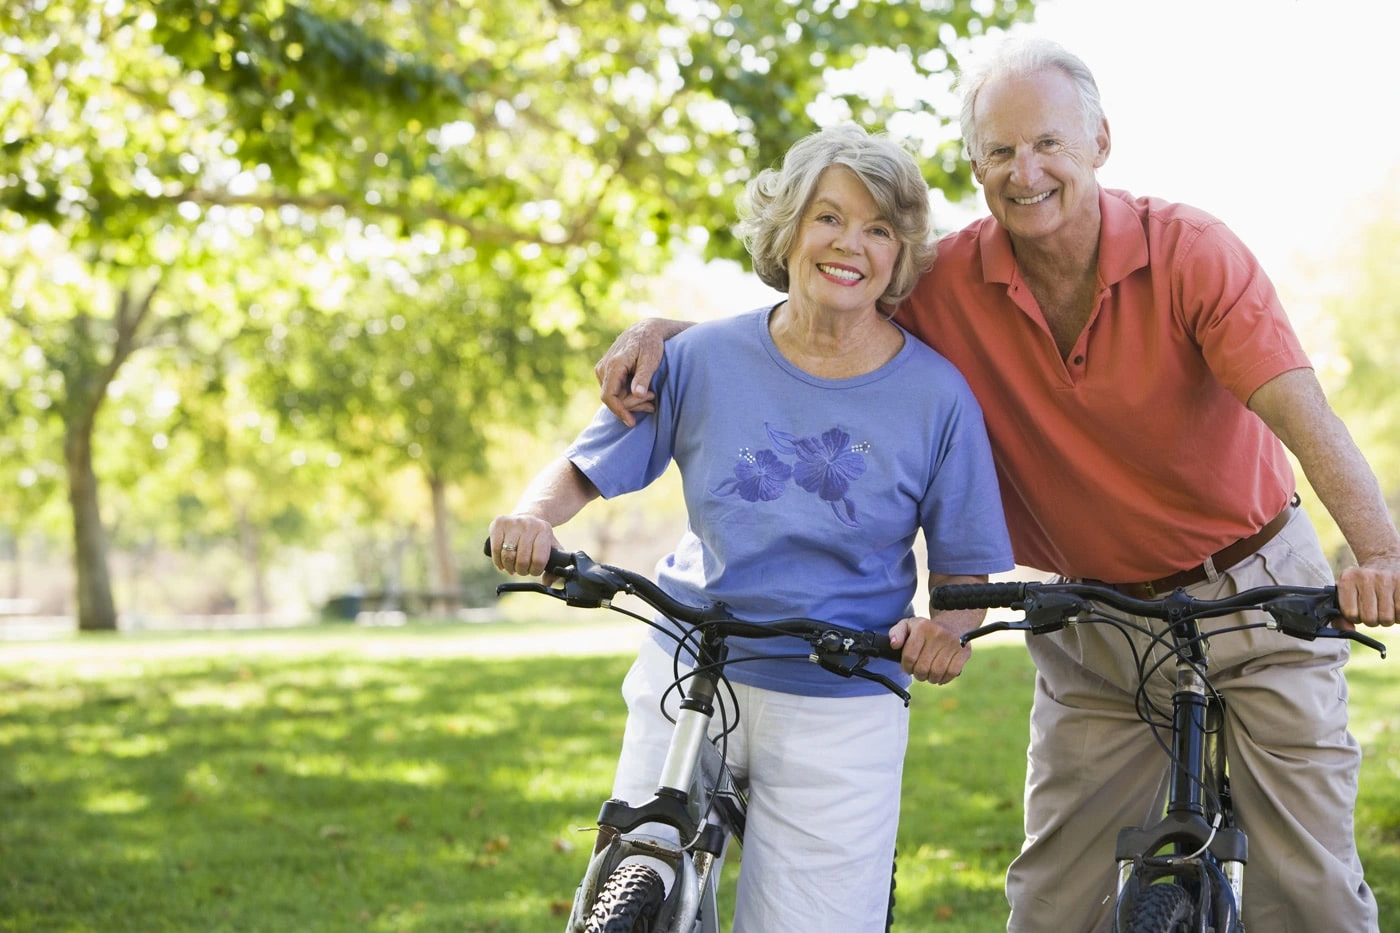 An elderly man and woman each holding a bicycle smiling, showcasing their dental crowns.